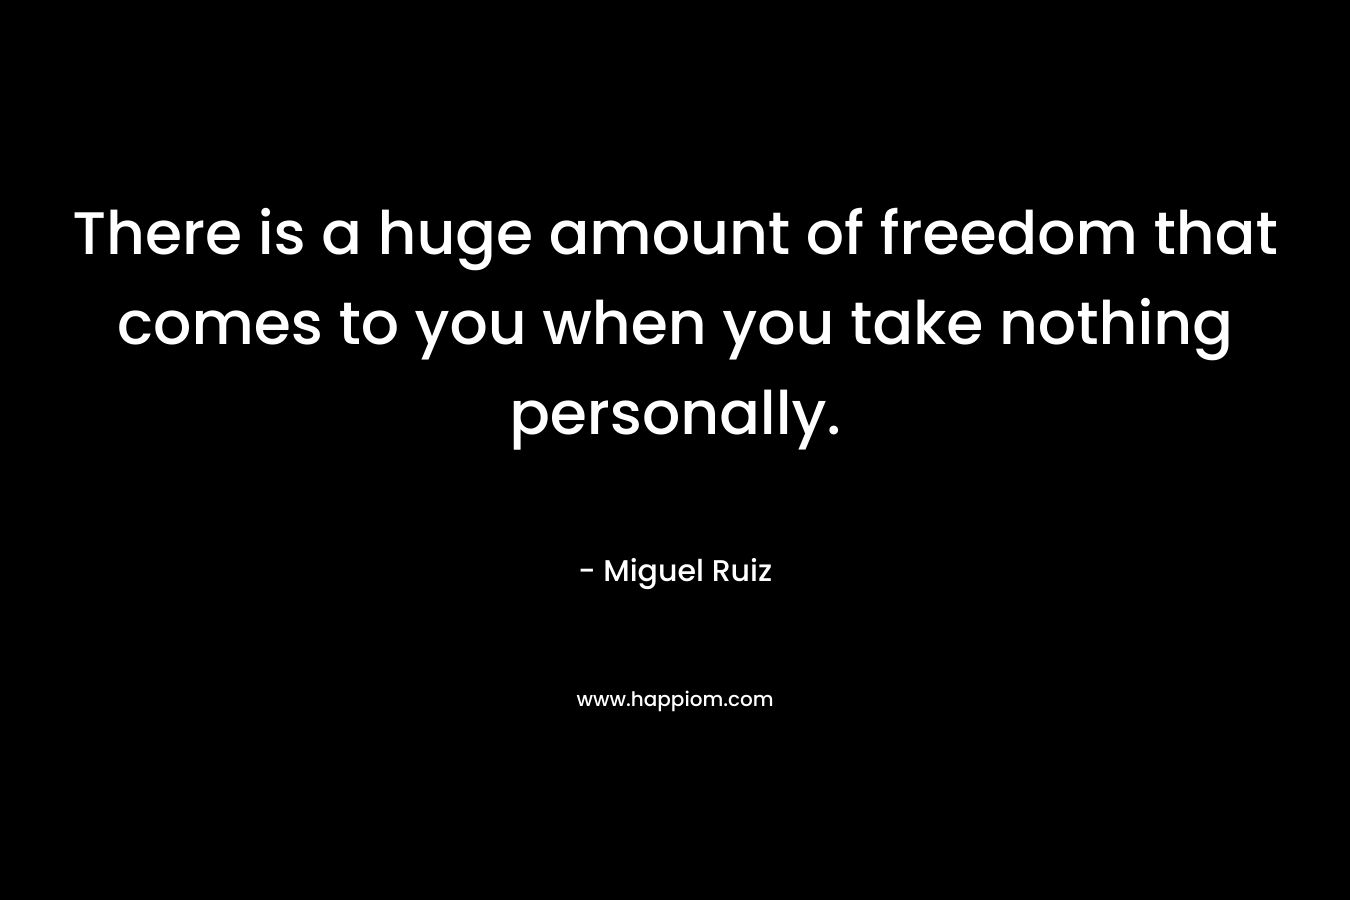 There is a huge amount of freedom that comes to you when you take nothing personally.